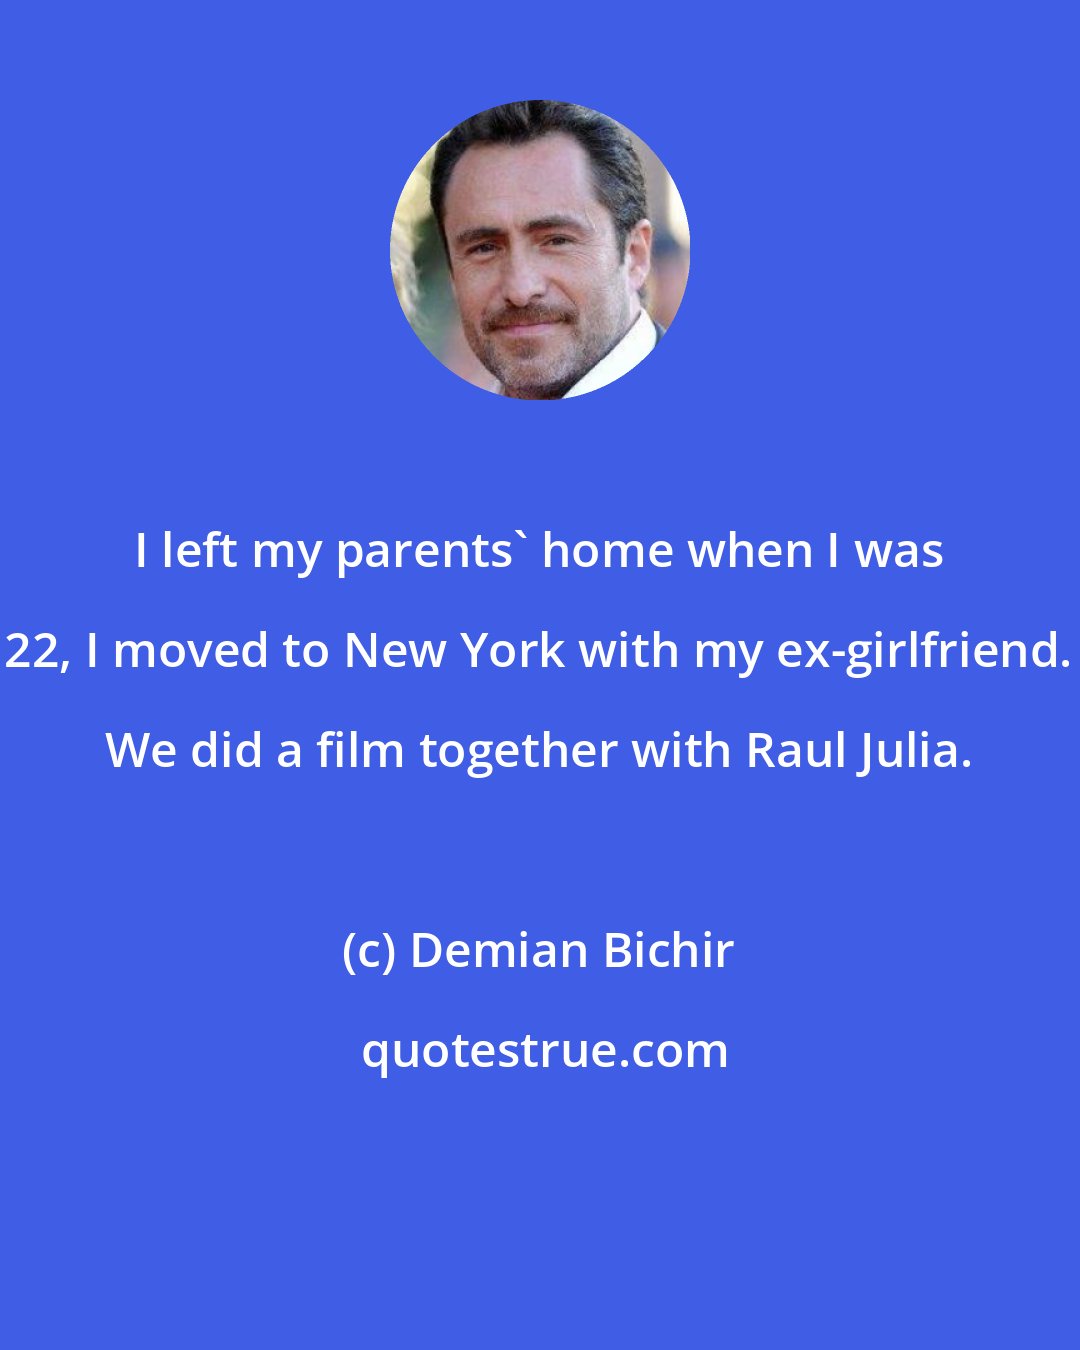 Demian Bichir: I left my parents' home when I was 22, I moved to New York with my ex-girlfriend. We did a film together with Raul Julia.